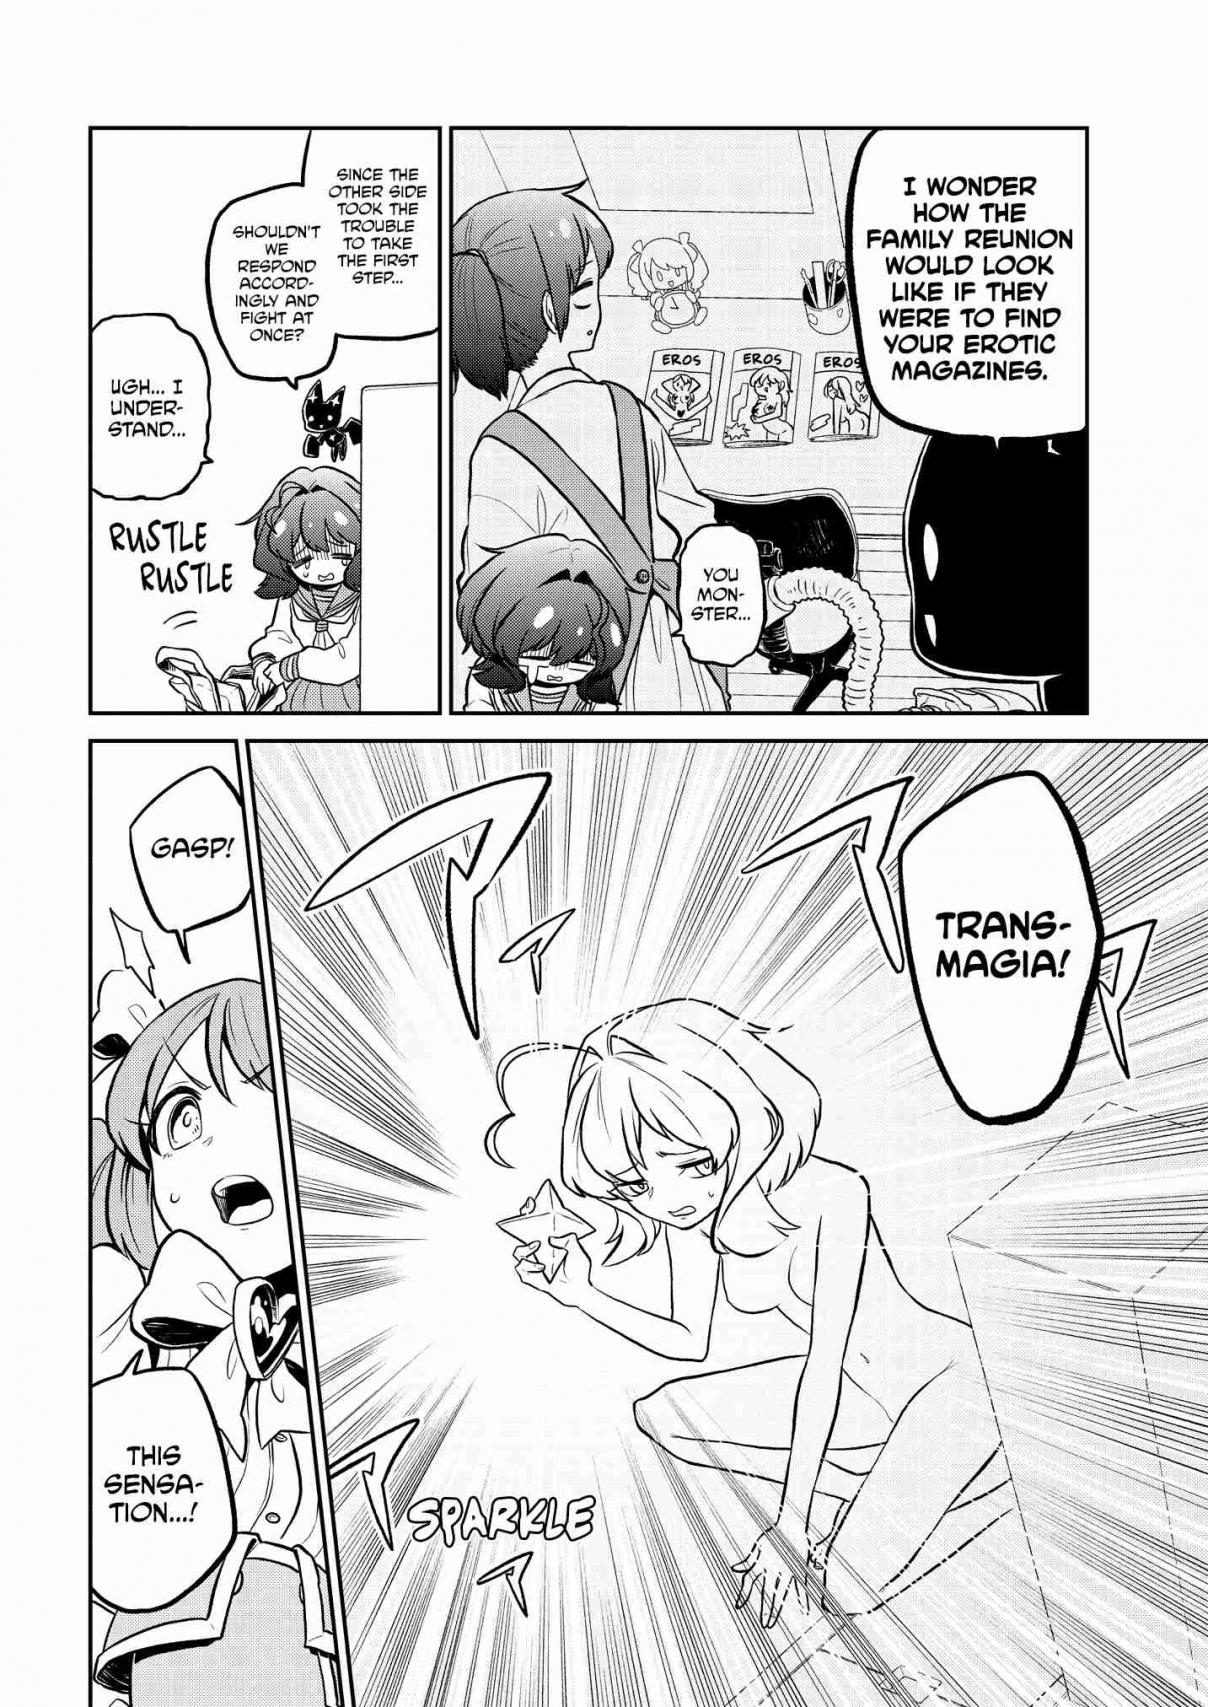 Looking Up To Magical Girls Vol. 1 Ch. 6